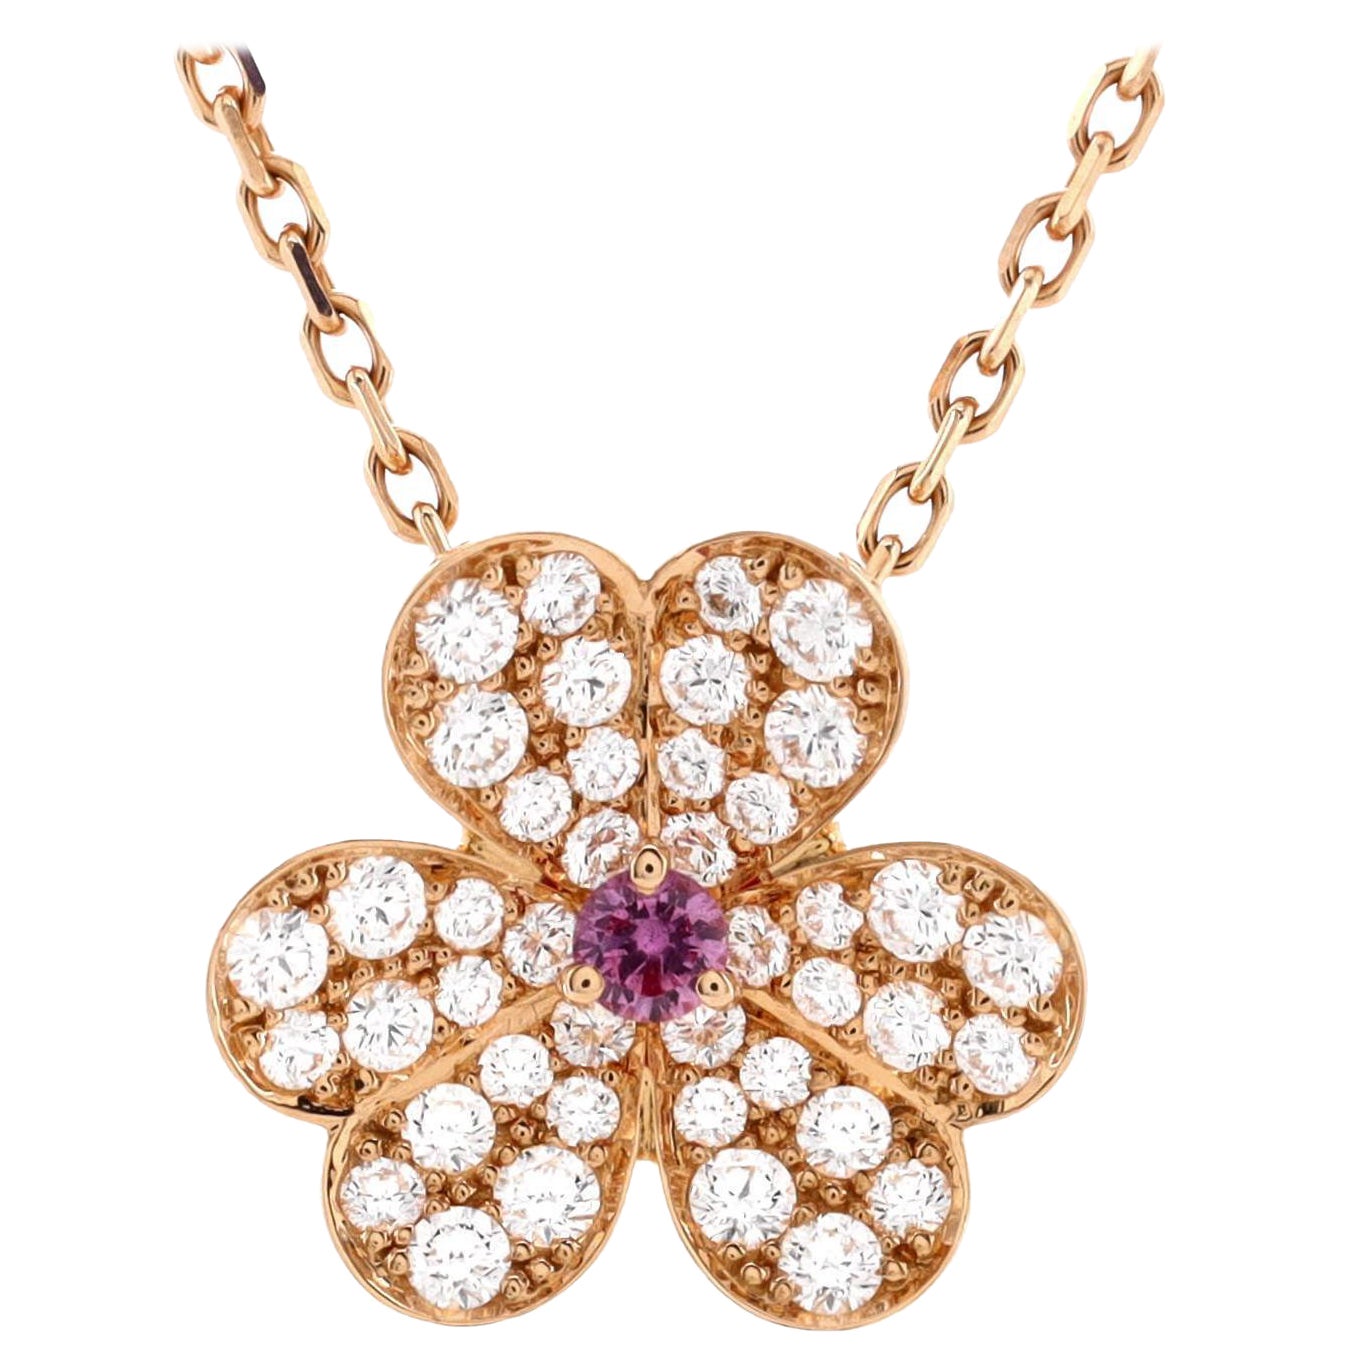 Van Cleef & Arpels Frivole Pendant Necklace 18k Rose Gold with Pink Sapphire